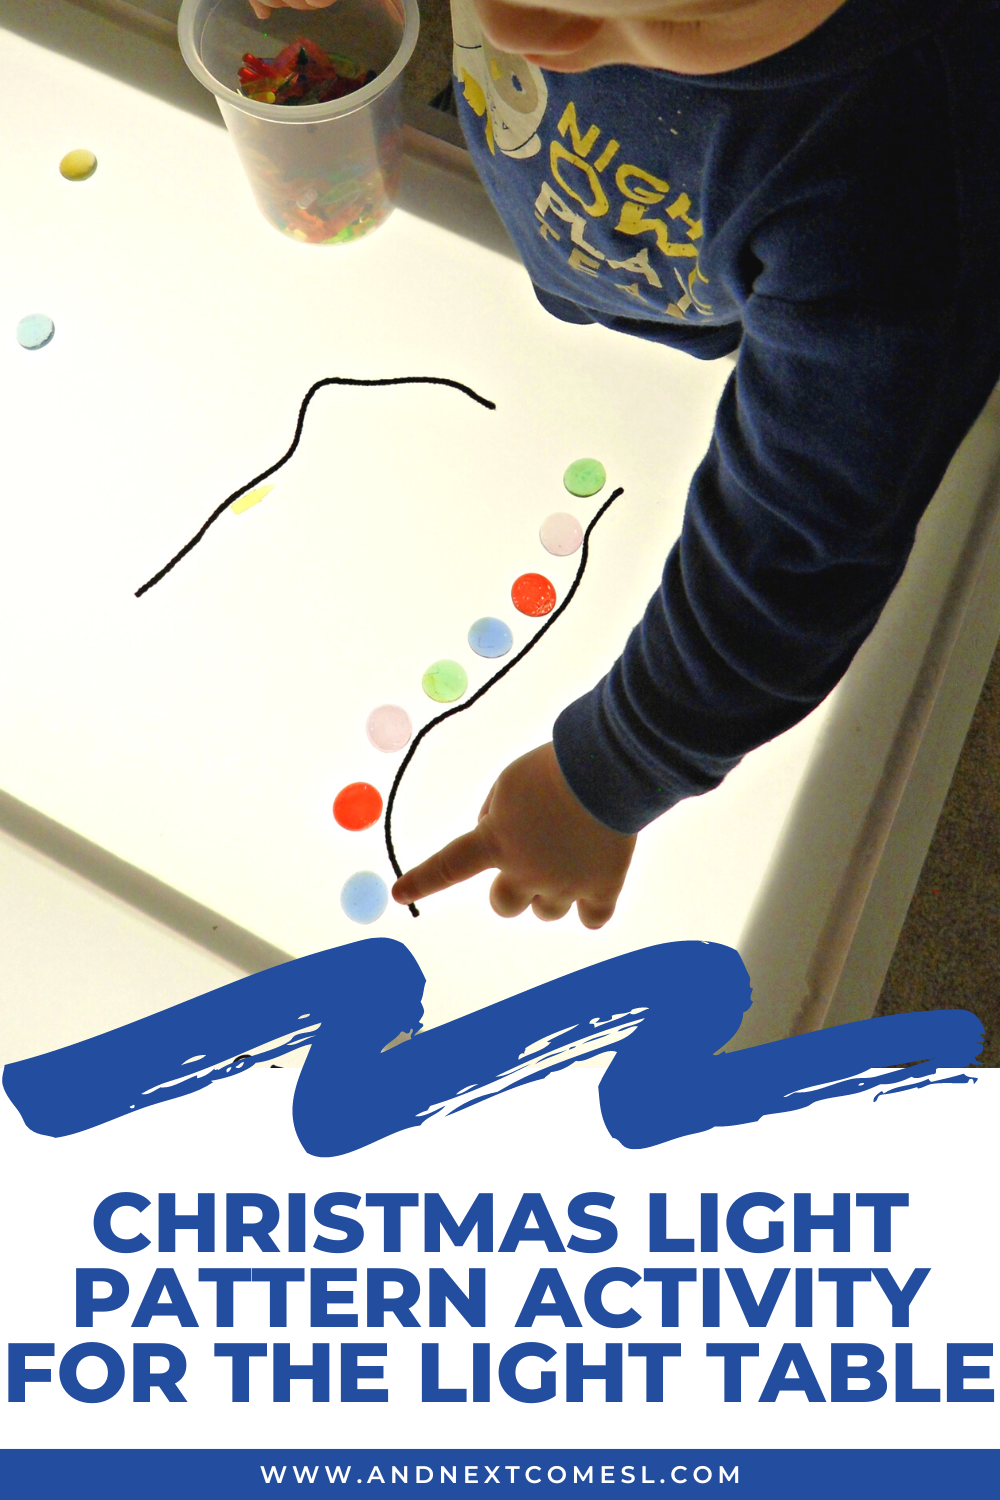 Christmas light pattern activity for kids on the light table - great for toddlers and preschoolers!